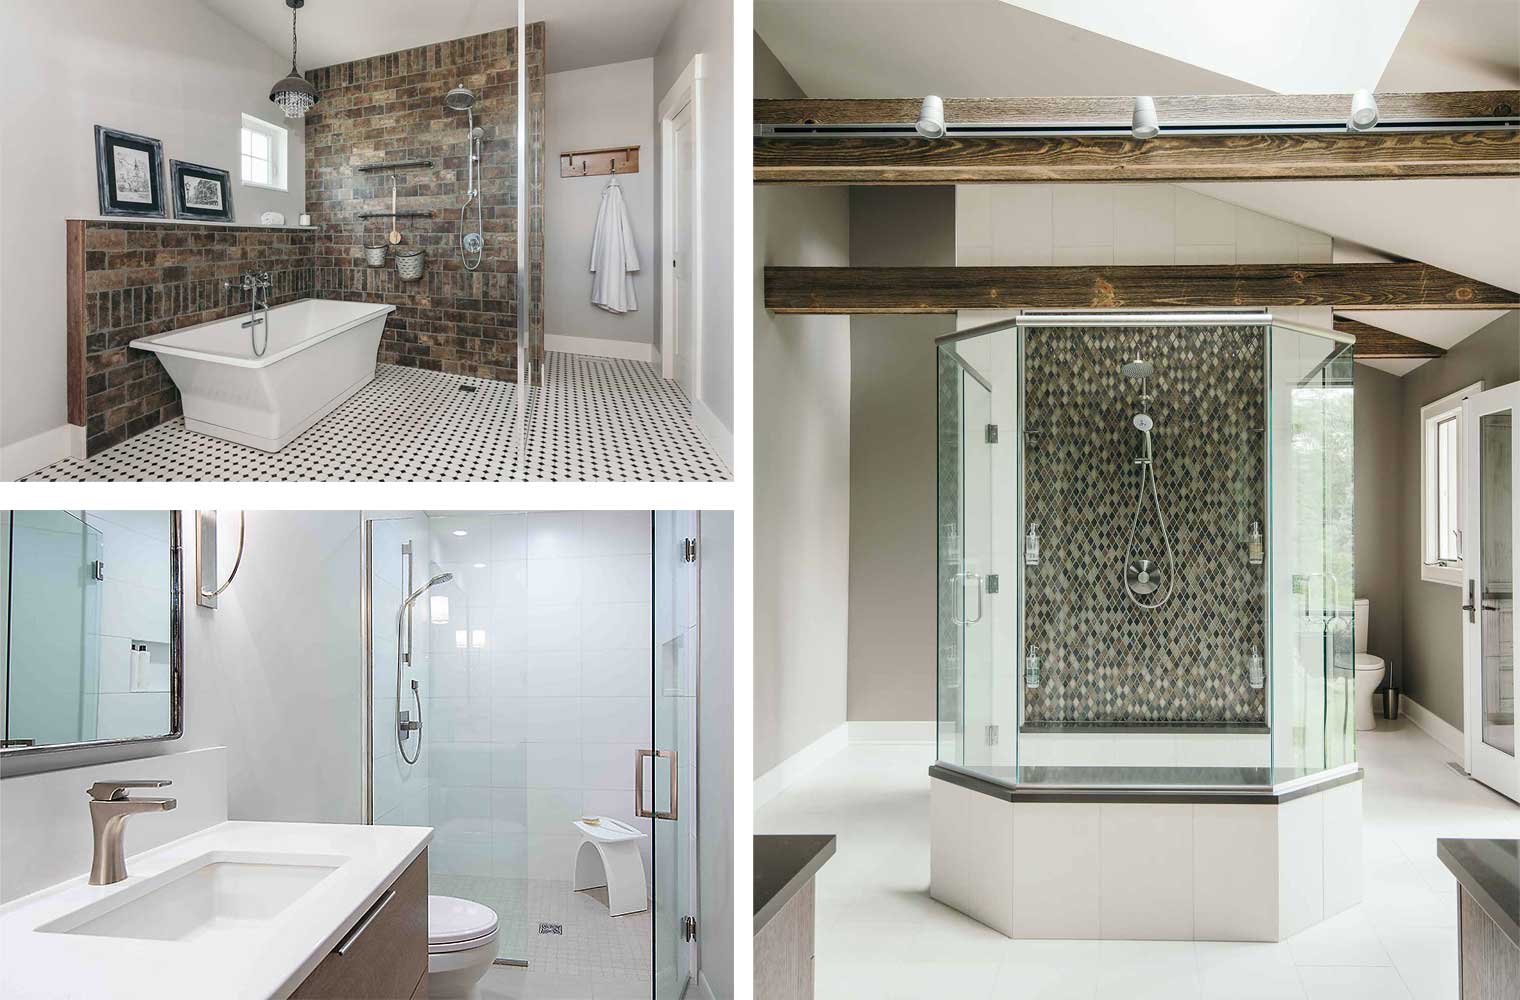 showers, tubs and bathroom designs by bathroom remodeler Silent Rivers in Des Moines